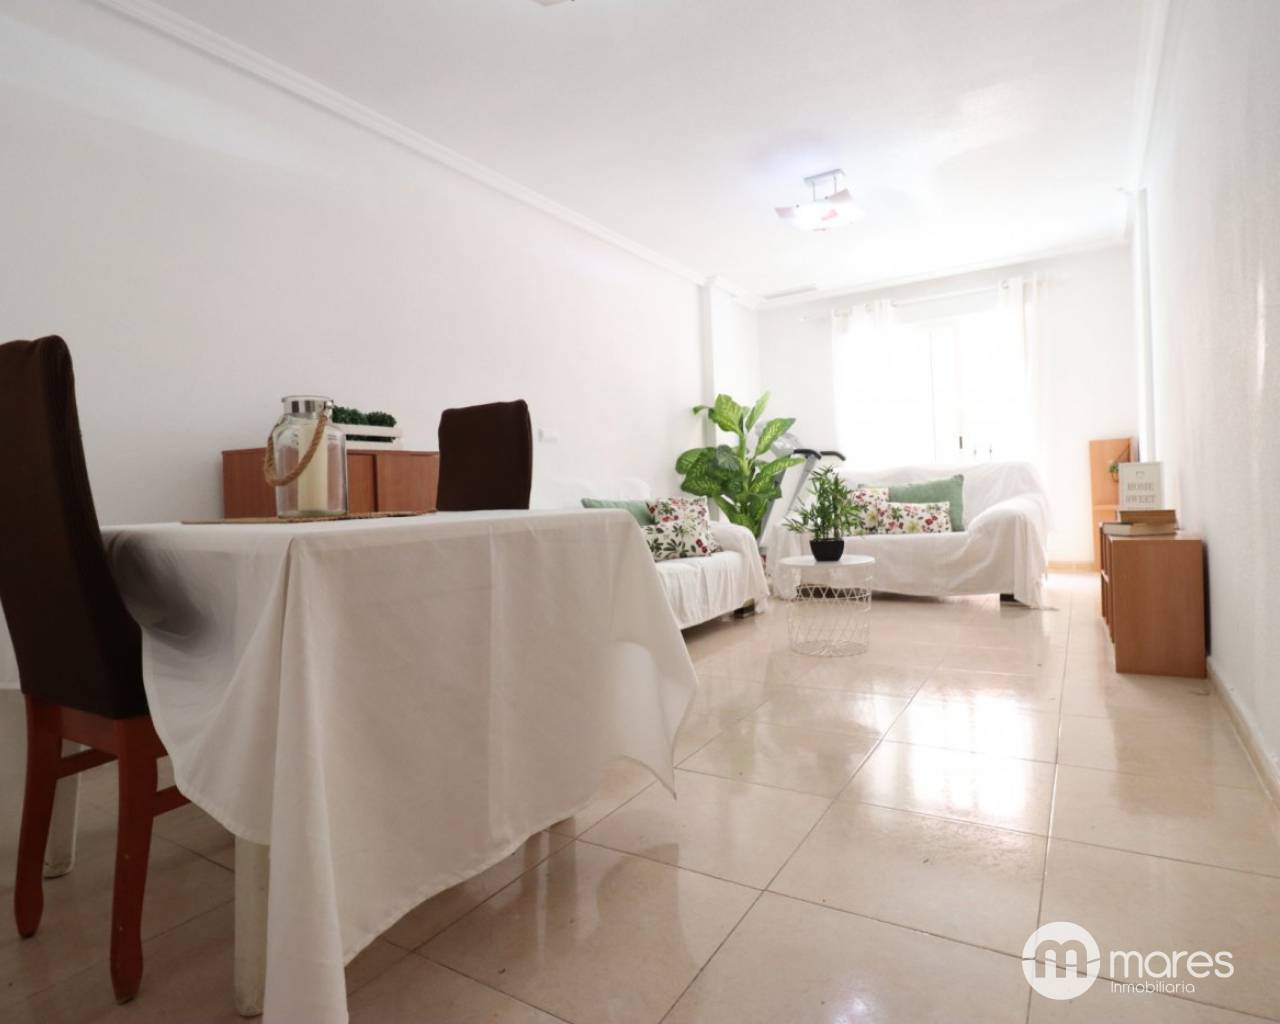 Flat - Long time Rental - Elche - Sector Quinto